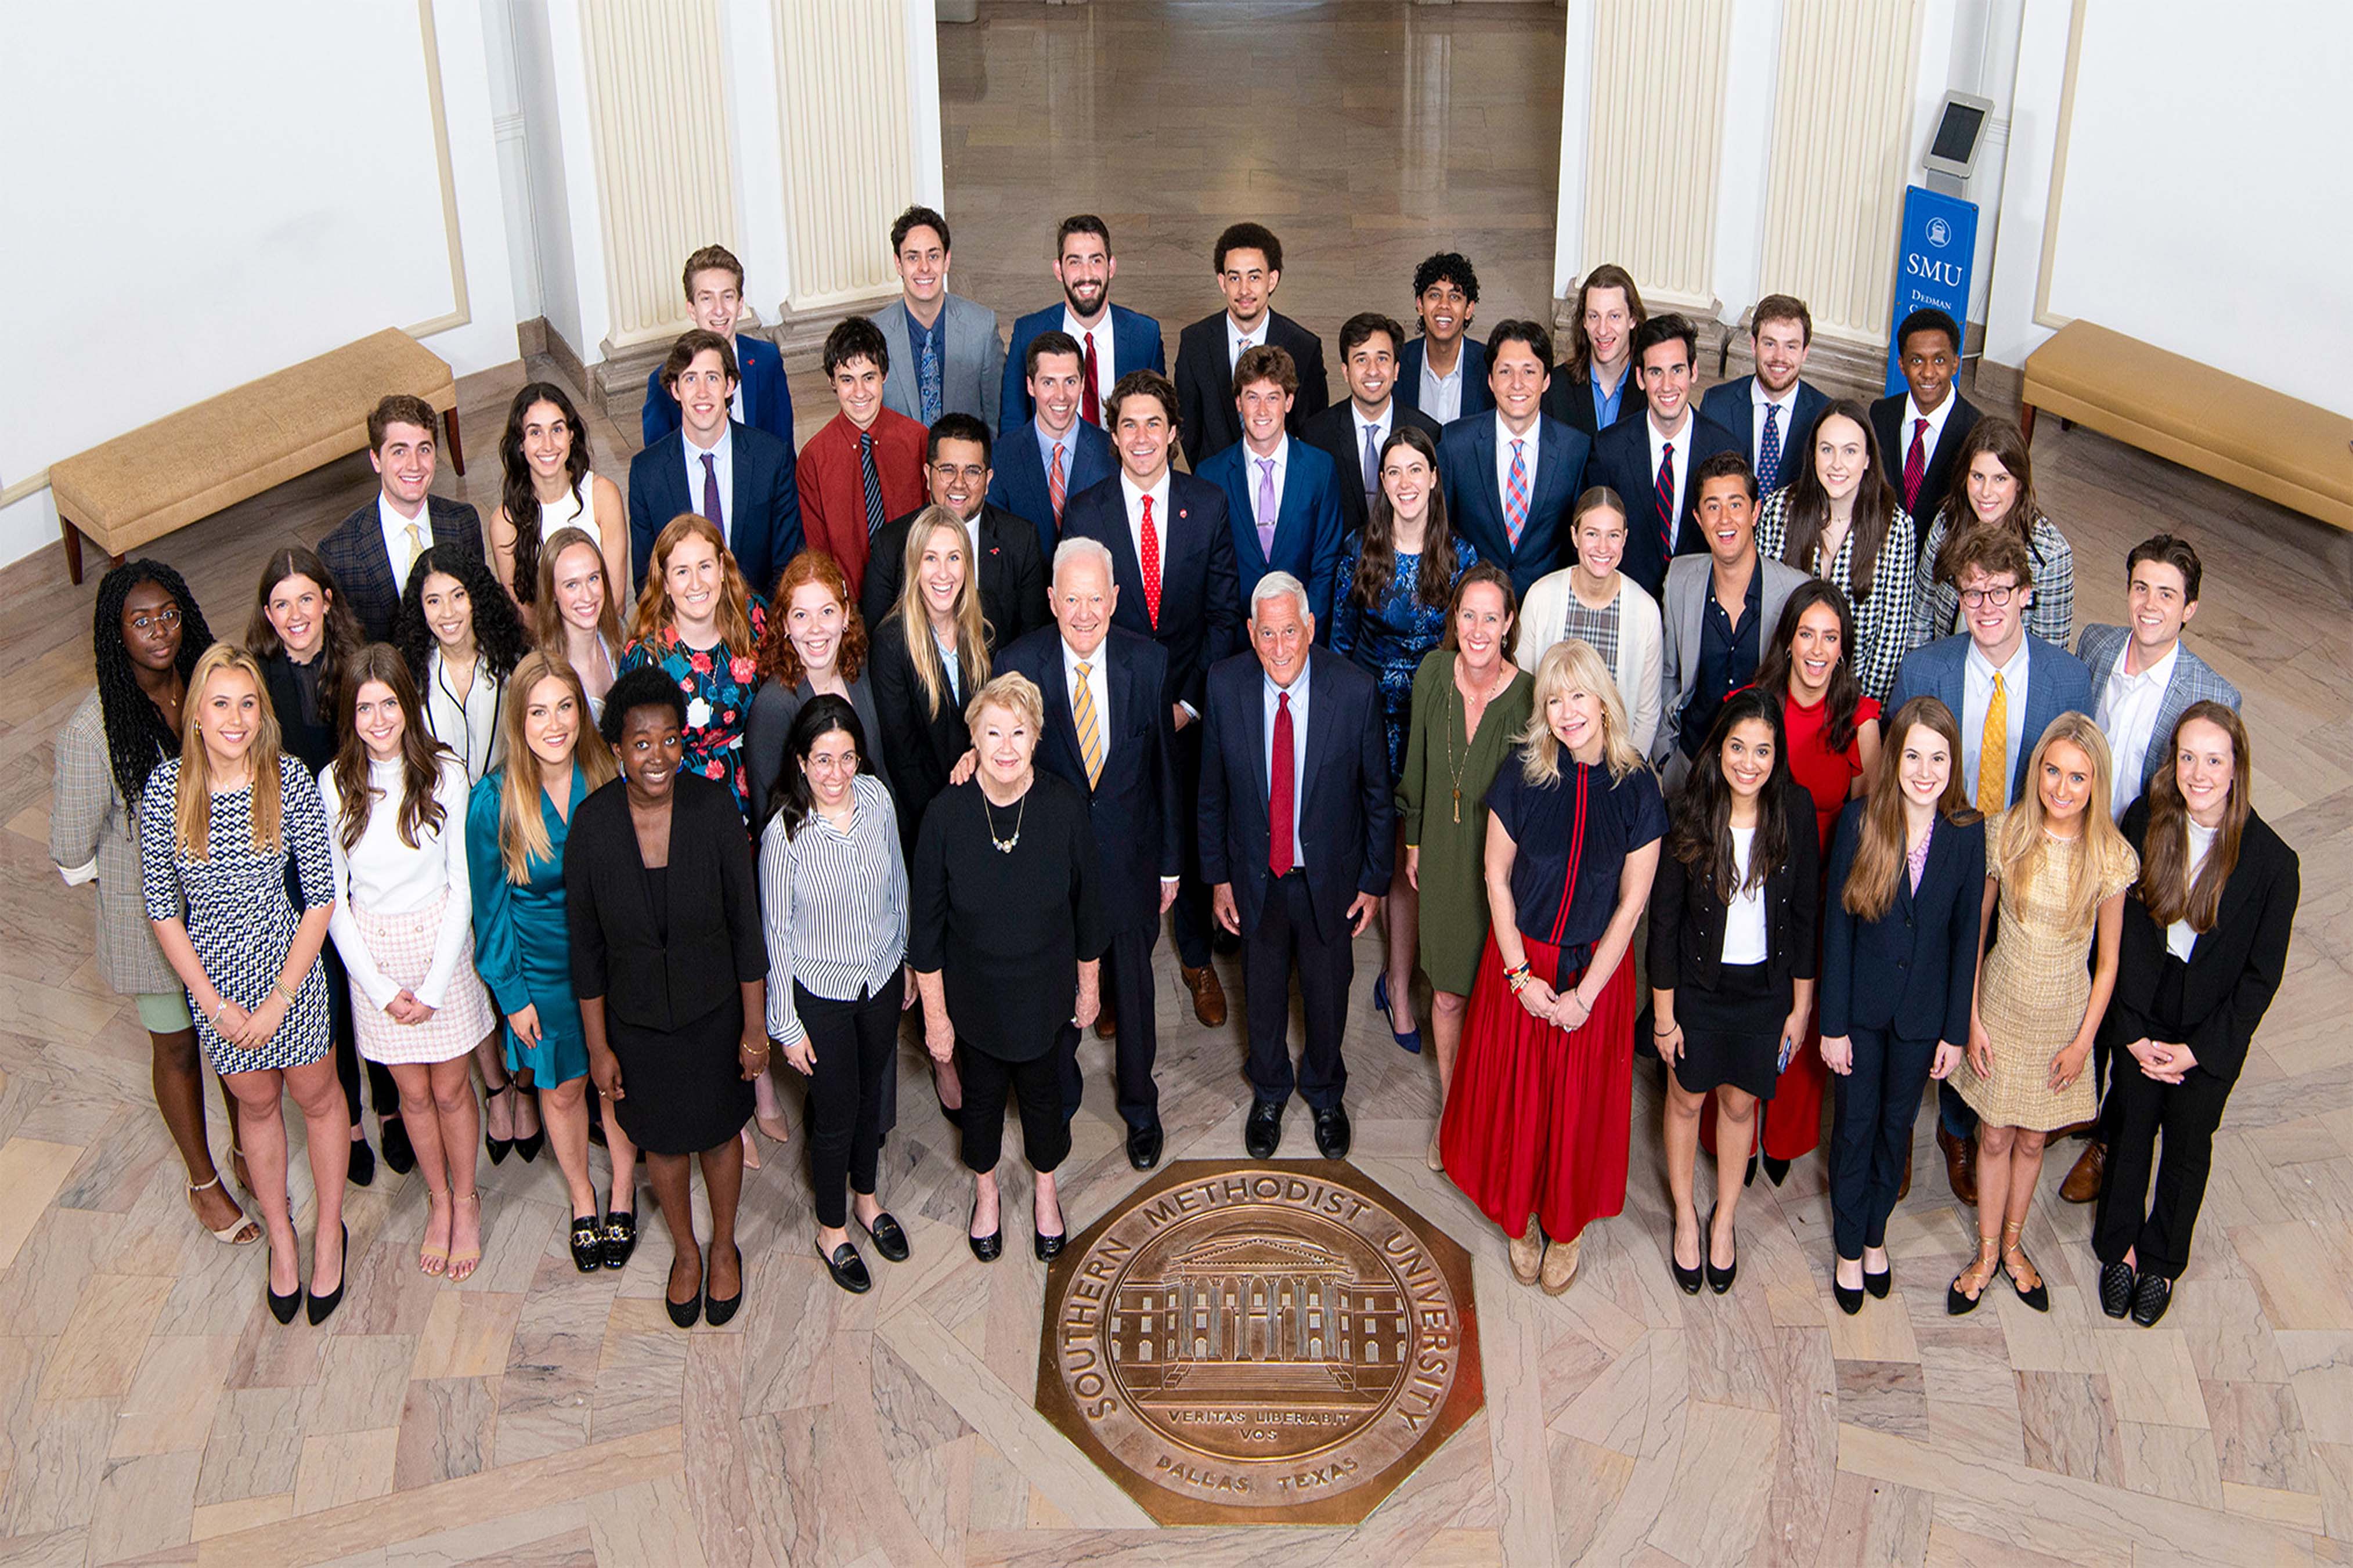 Hunt Scholars with Ray L. and Nancy Ann Hunt and Walter Isaacson standing in Dallas Hall Rotunda